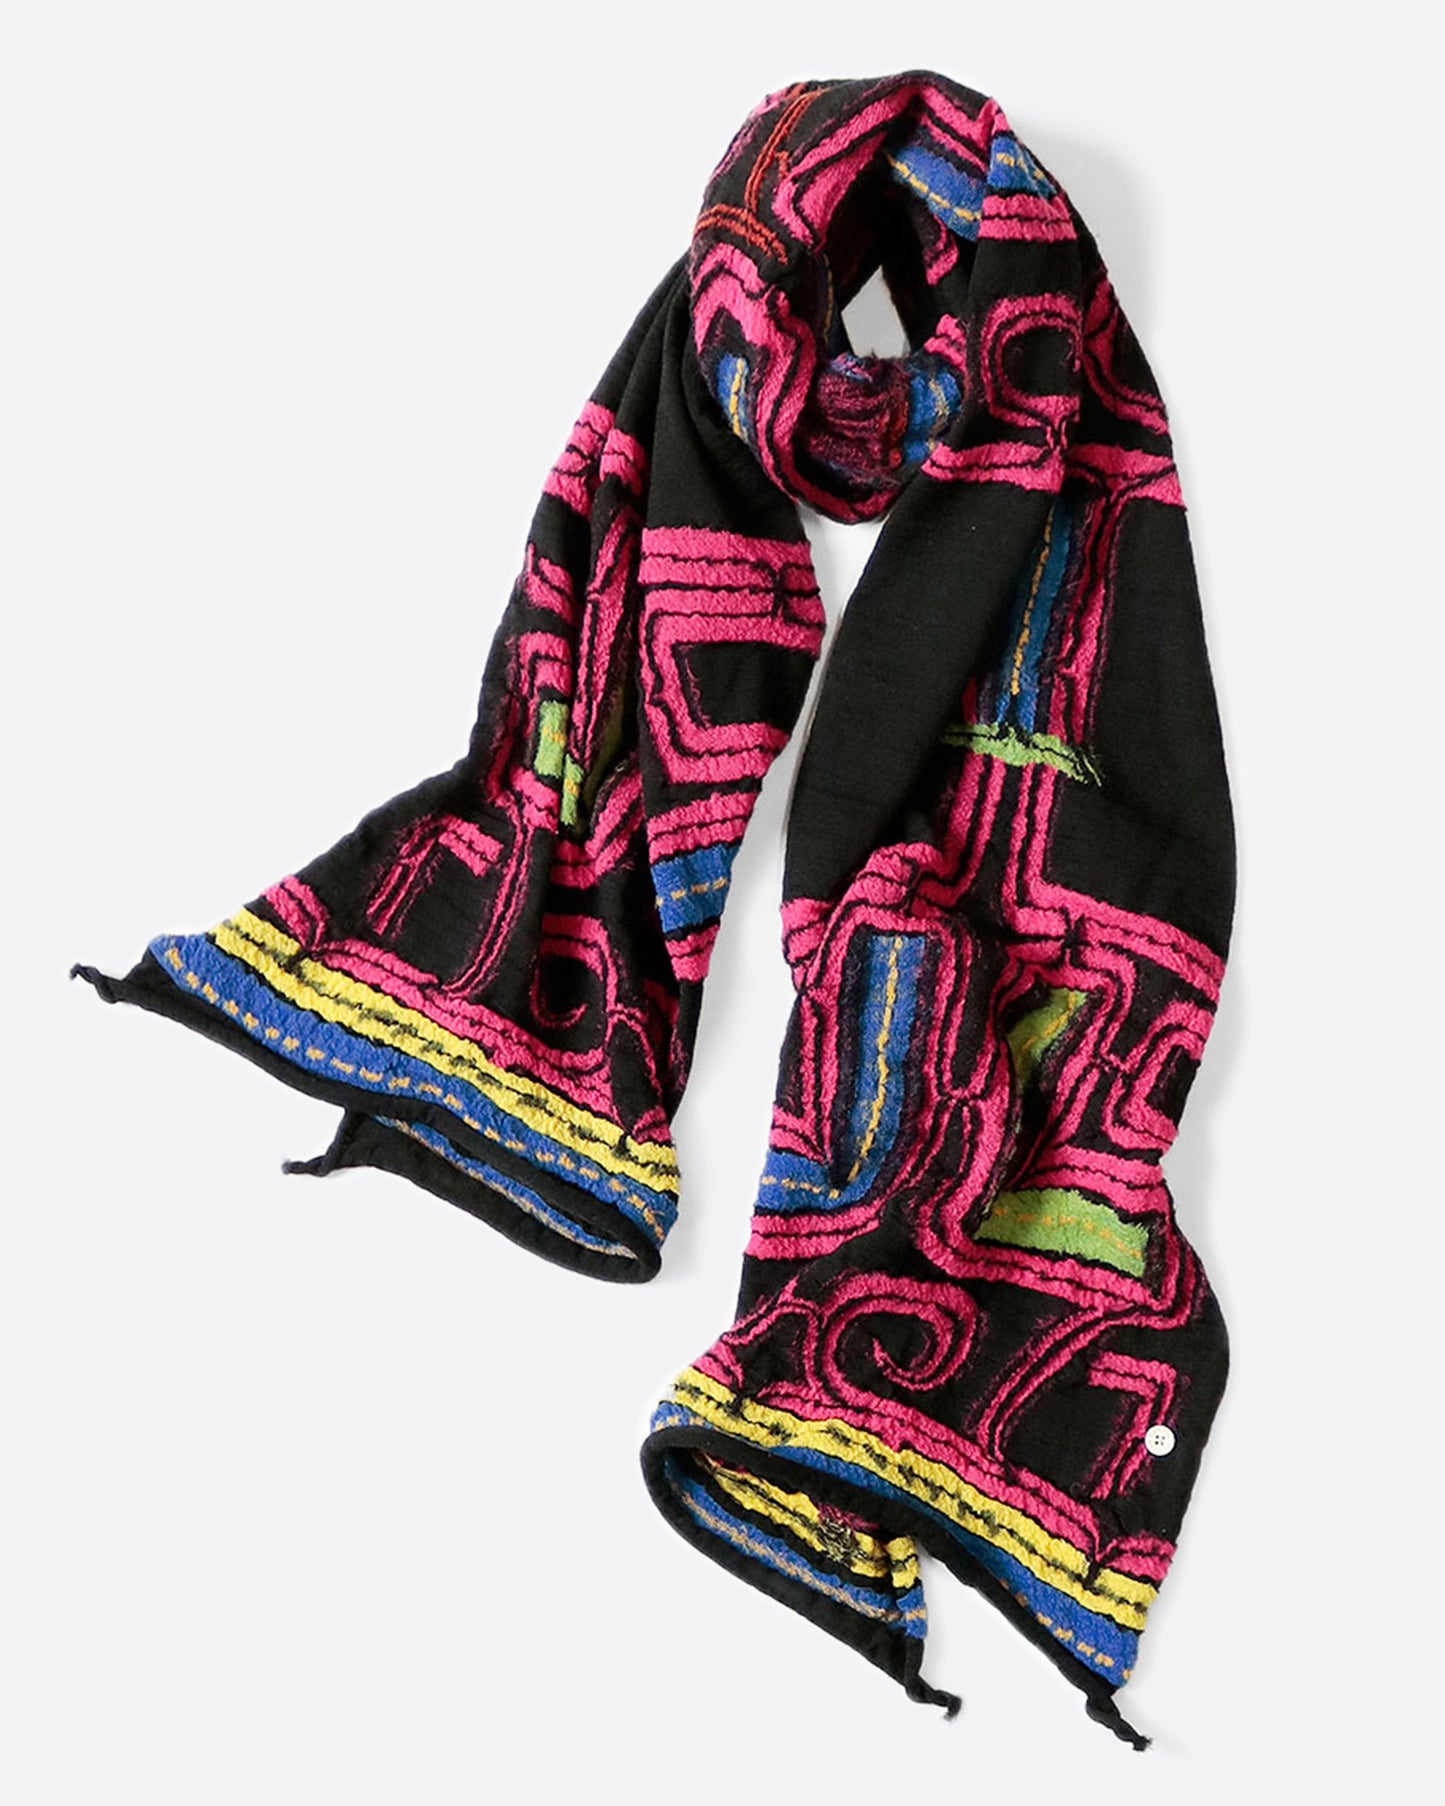 A black scarf with a neon pink Ainu pattern, shown coiled.